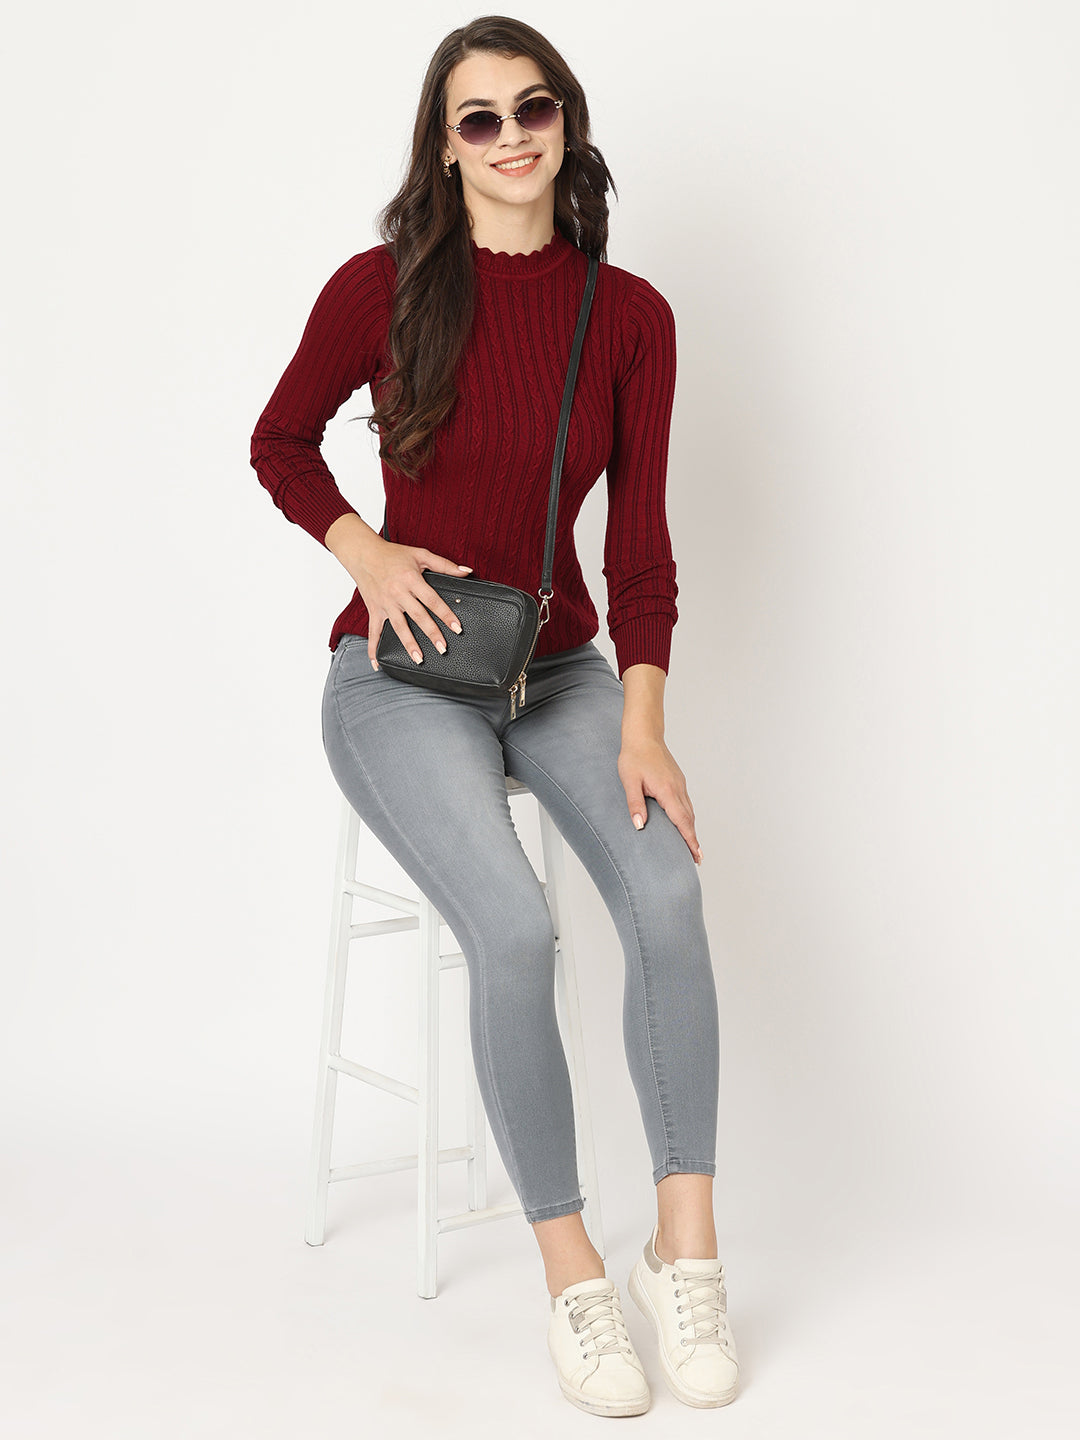 Women High-Rise Skinny Fit Grey Jeans